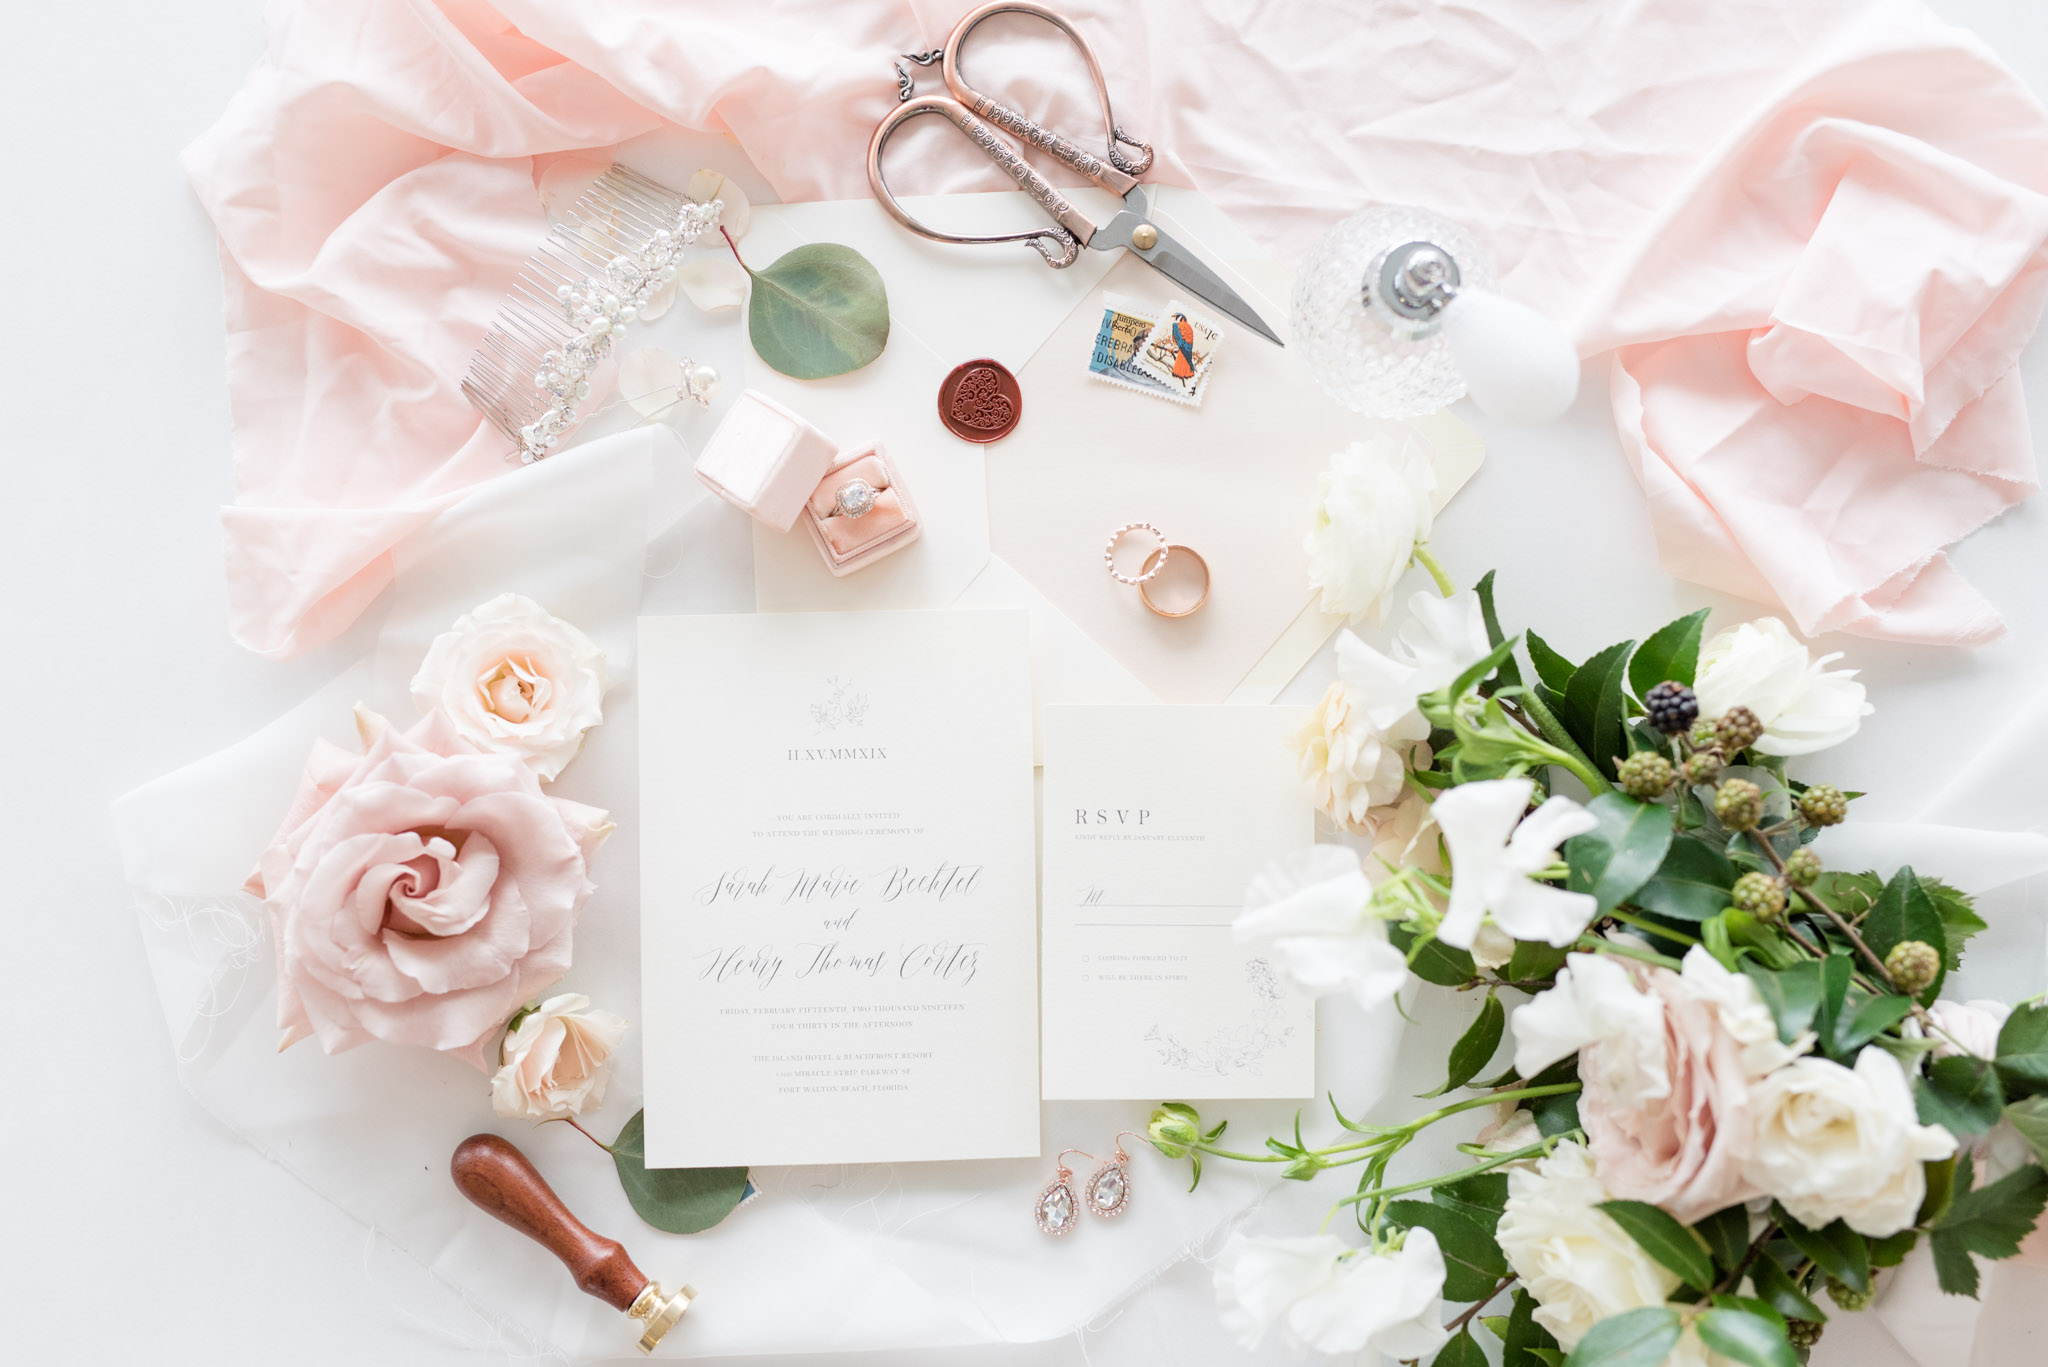 Wedding invitations sit with bridal details.